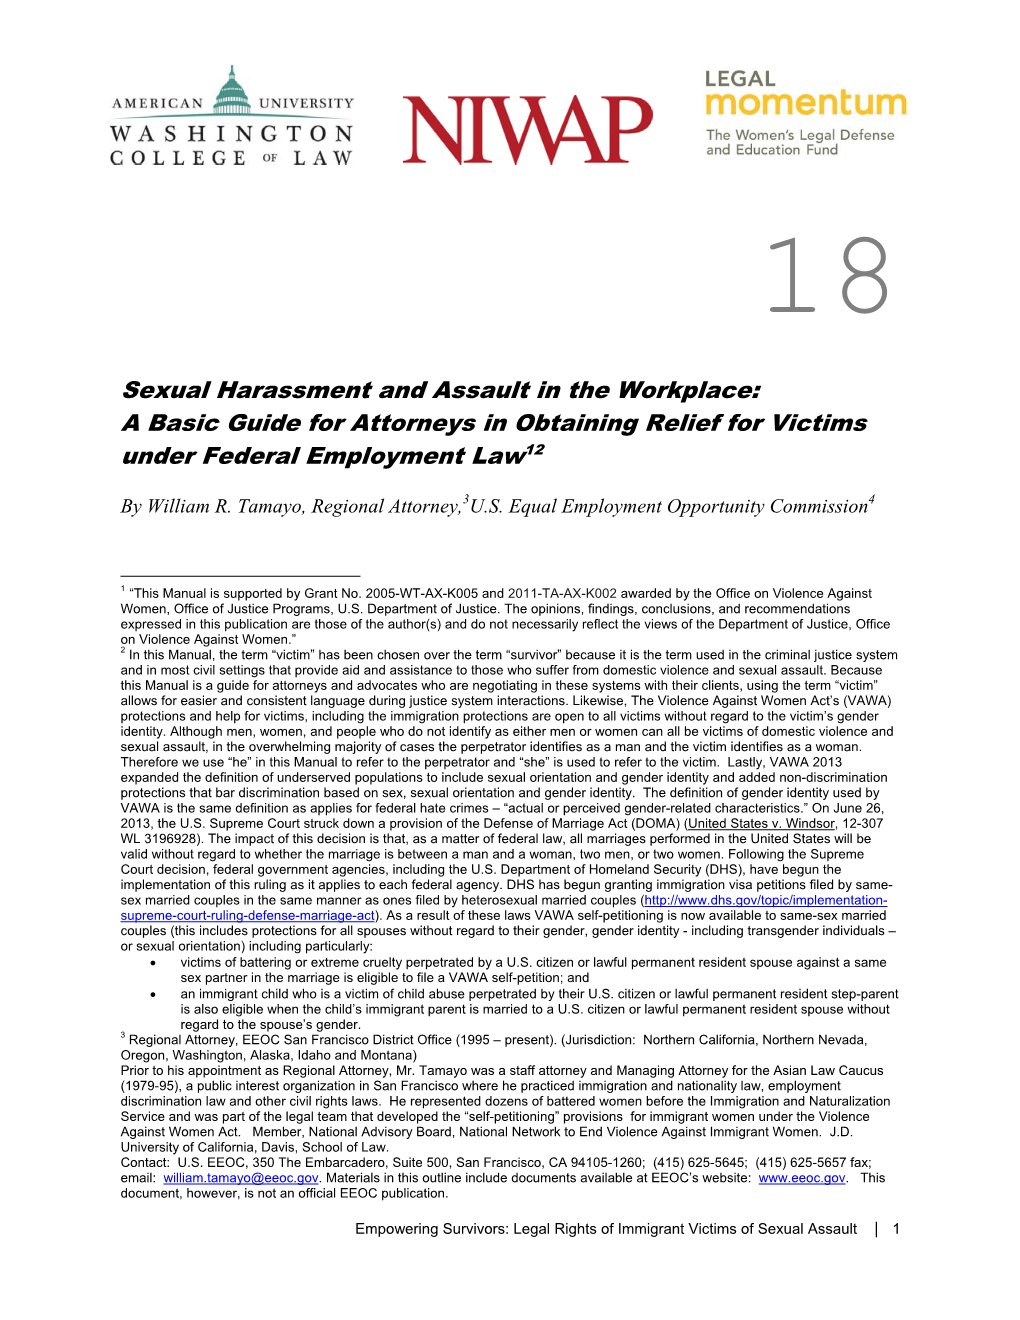 Sexual Harassment and Assault in the Workplace: a Basic Guide for Attorneys in Obtaining Relief for Victims Under Federal Employment Law12